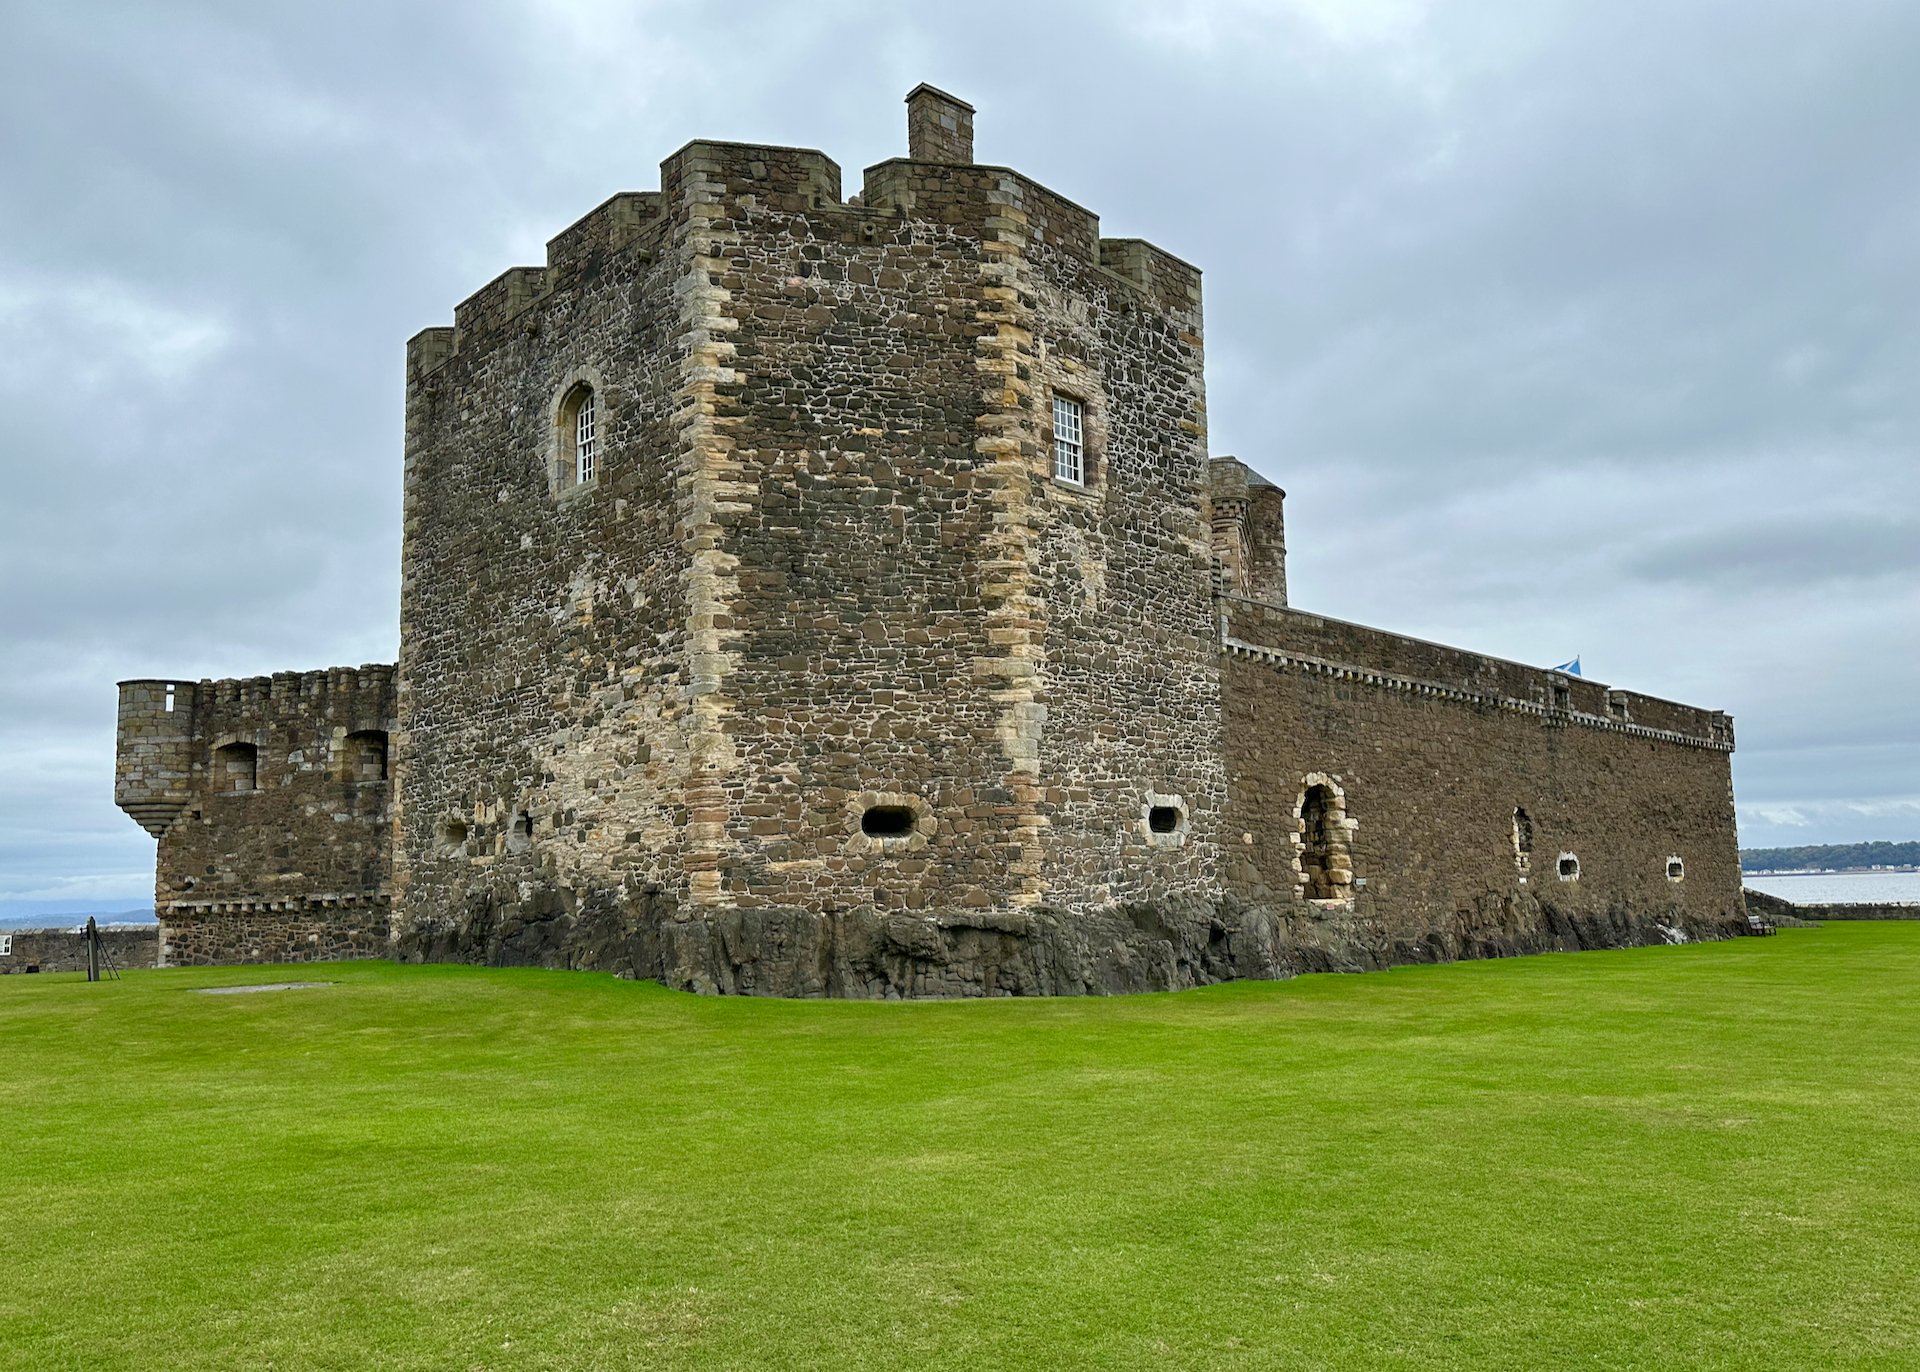  Built in the 15th century, the castle has seen a lot of history.  